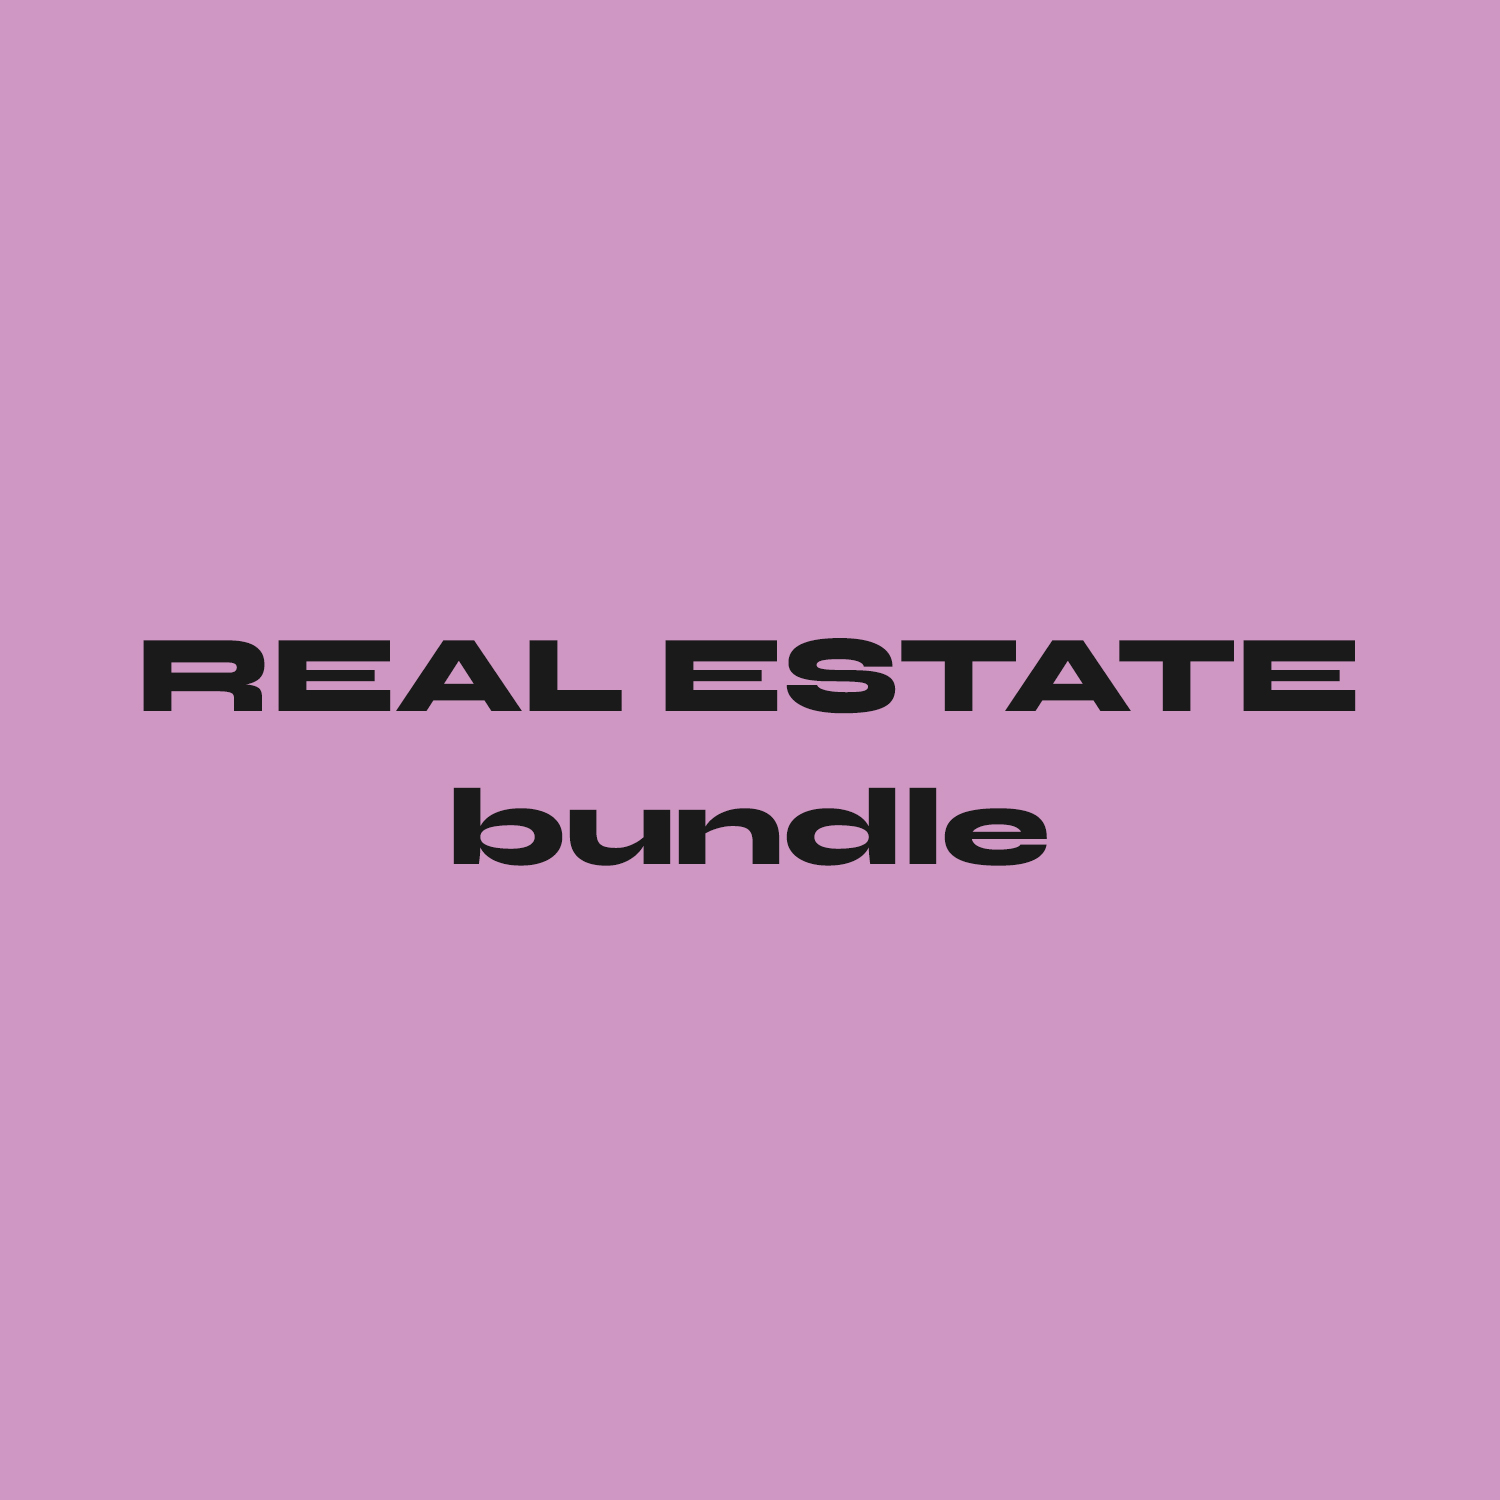 Image with text that reads "Real Estate" on pink background.